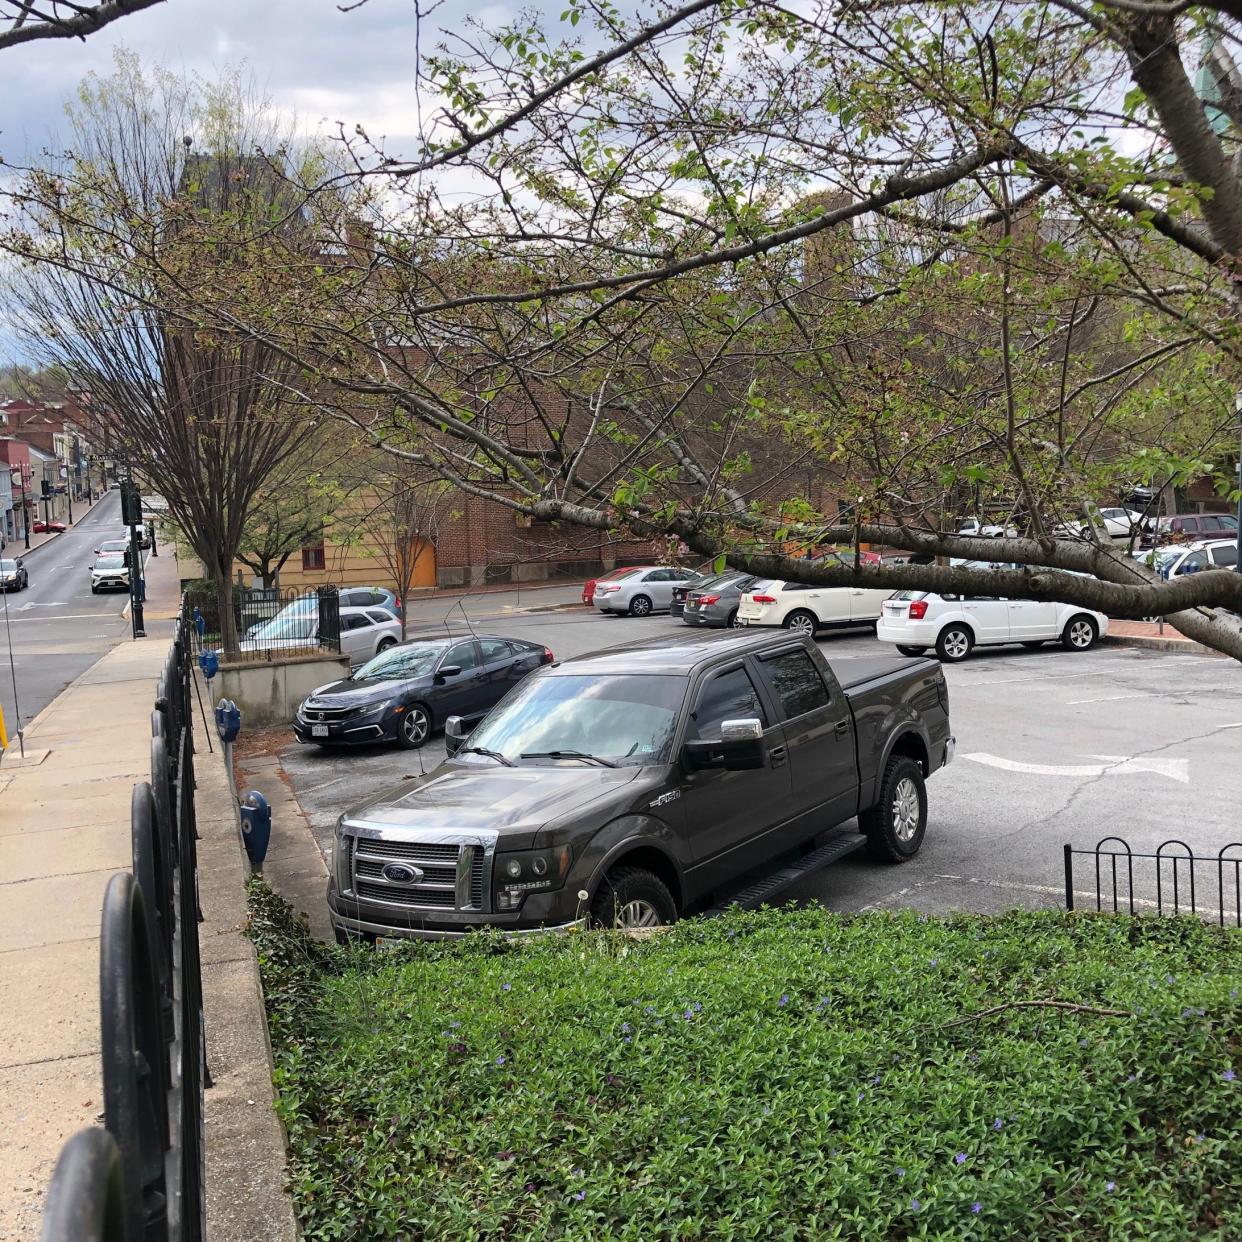 The Hardy Lot lies at the corner of North Market Street and East Beverley Street, and serves as a convenient parking location for the owners, employees, and customers of businesses on Beverley Street